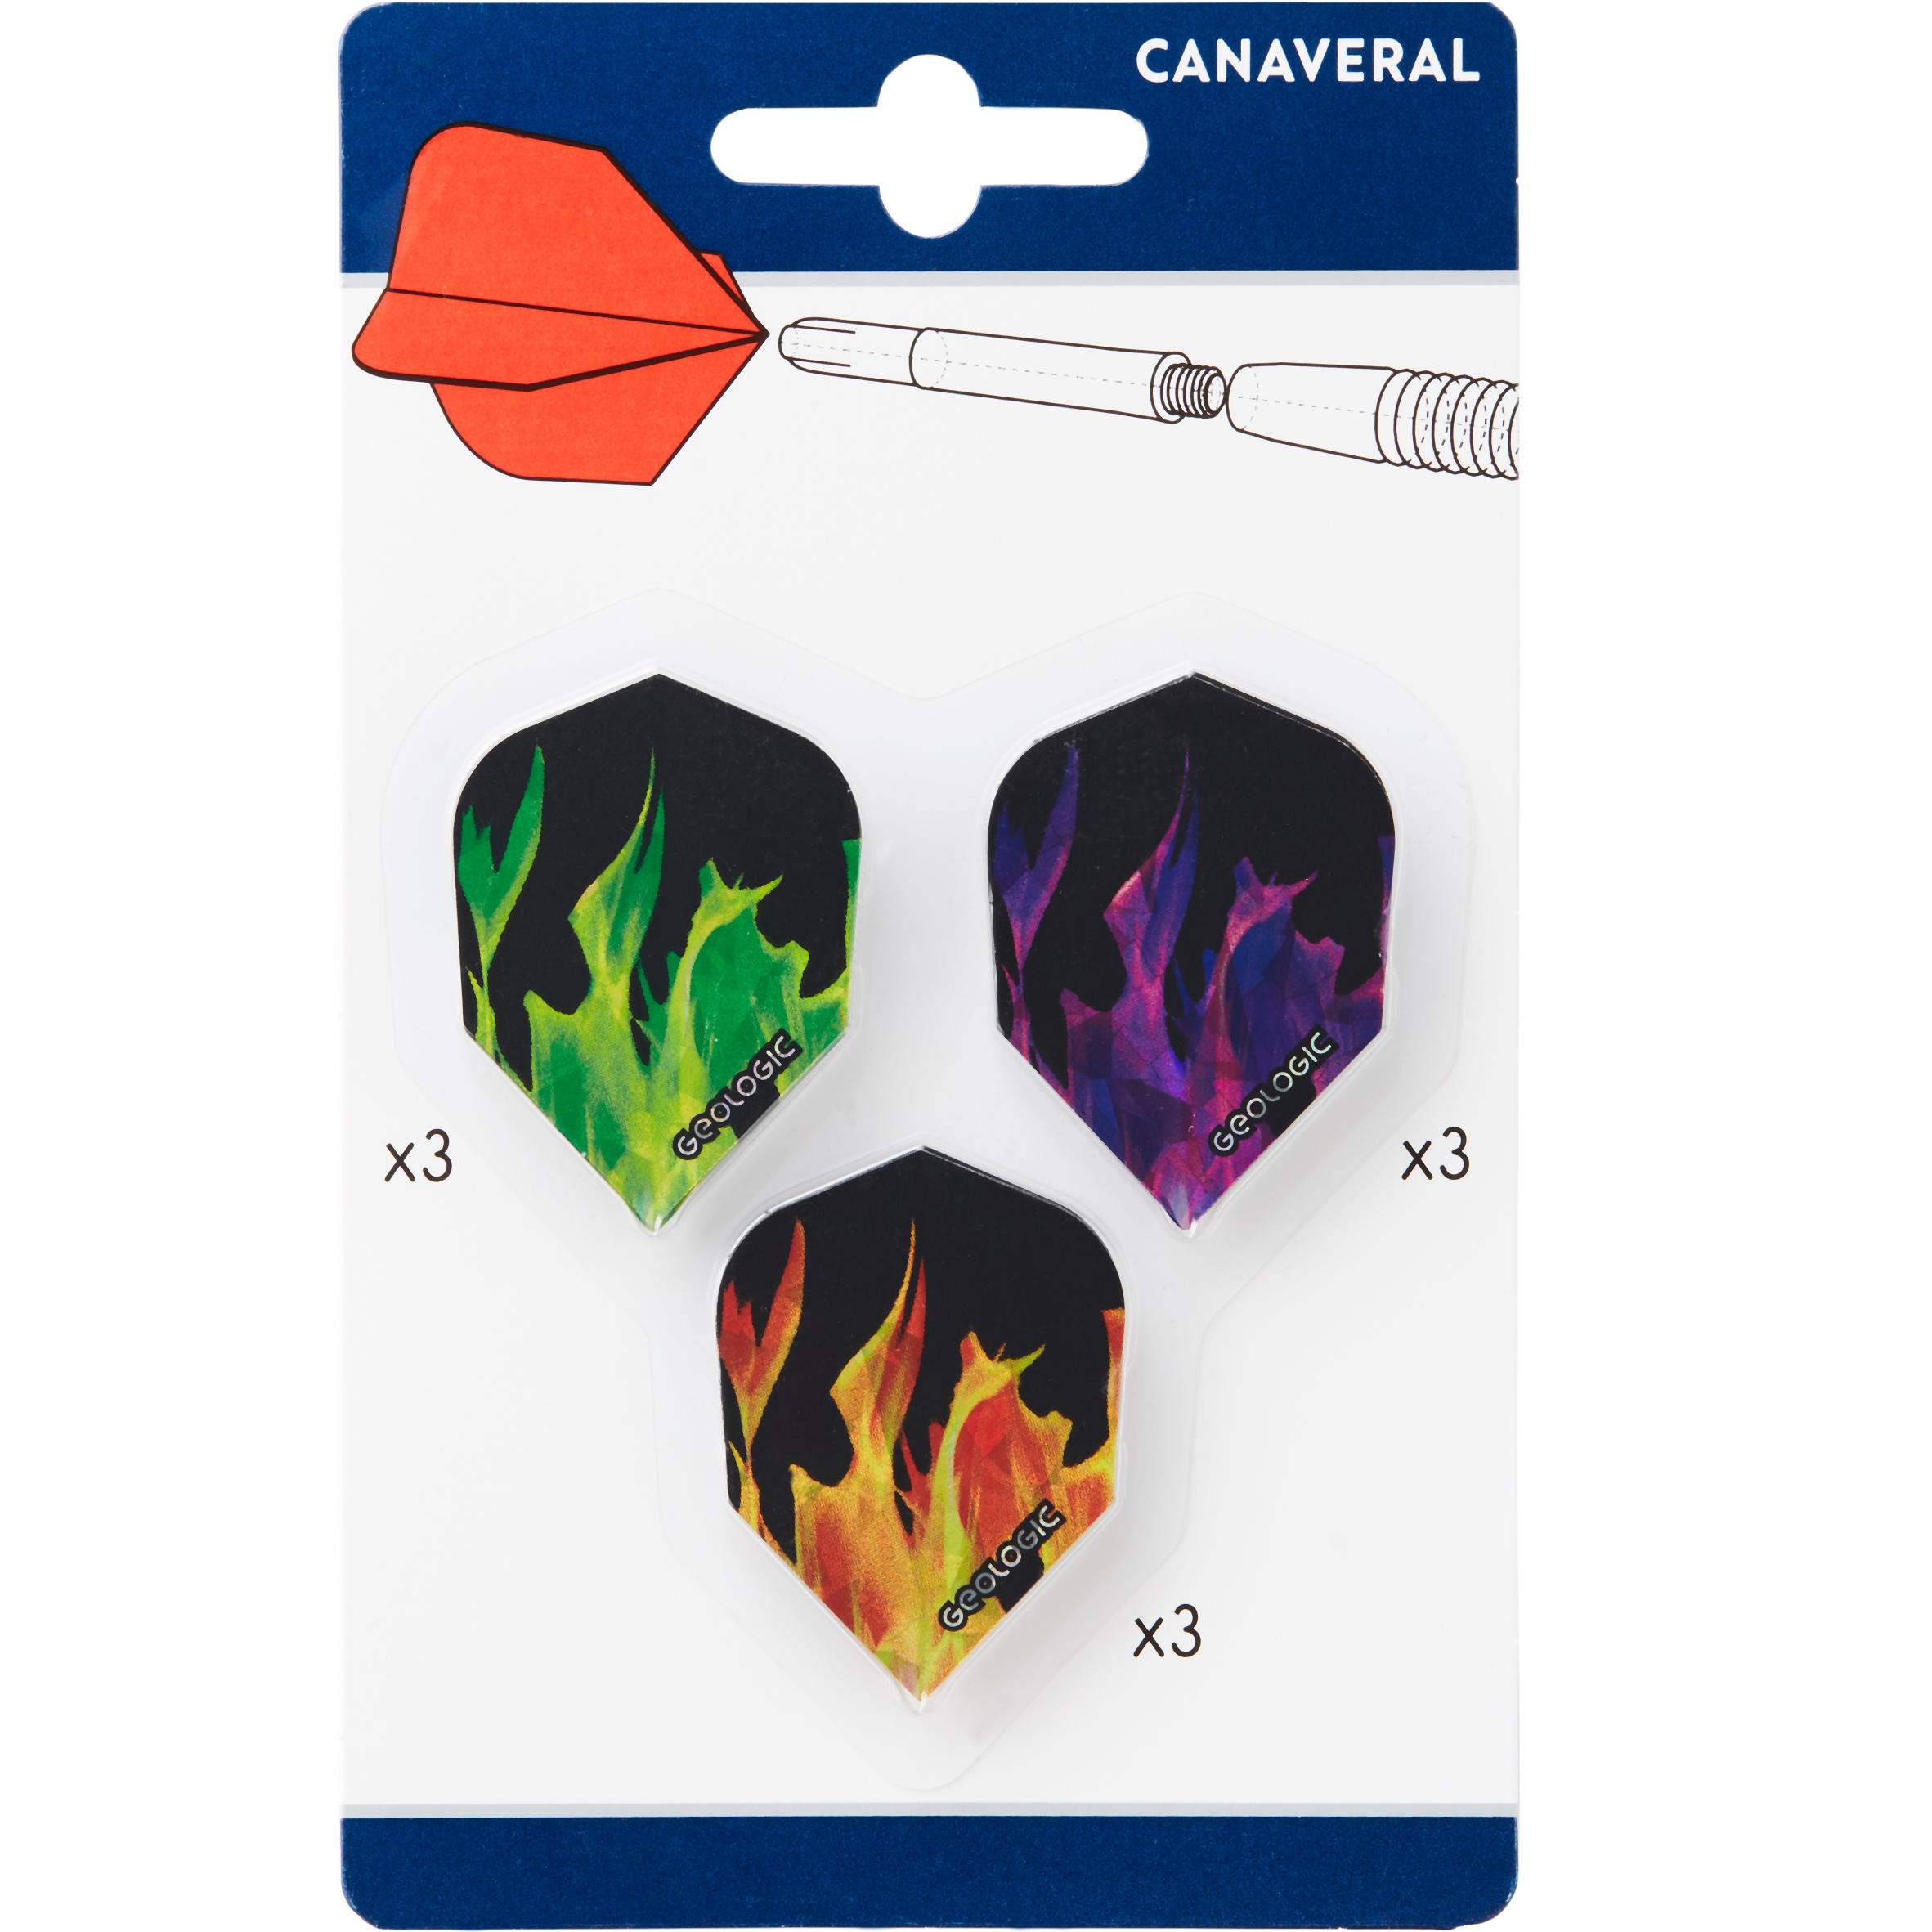 Standard Flames Flights 3 x Tri-Pack - CANAVERAL